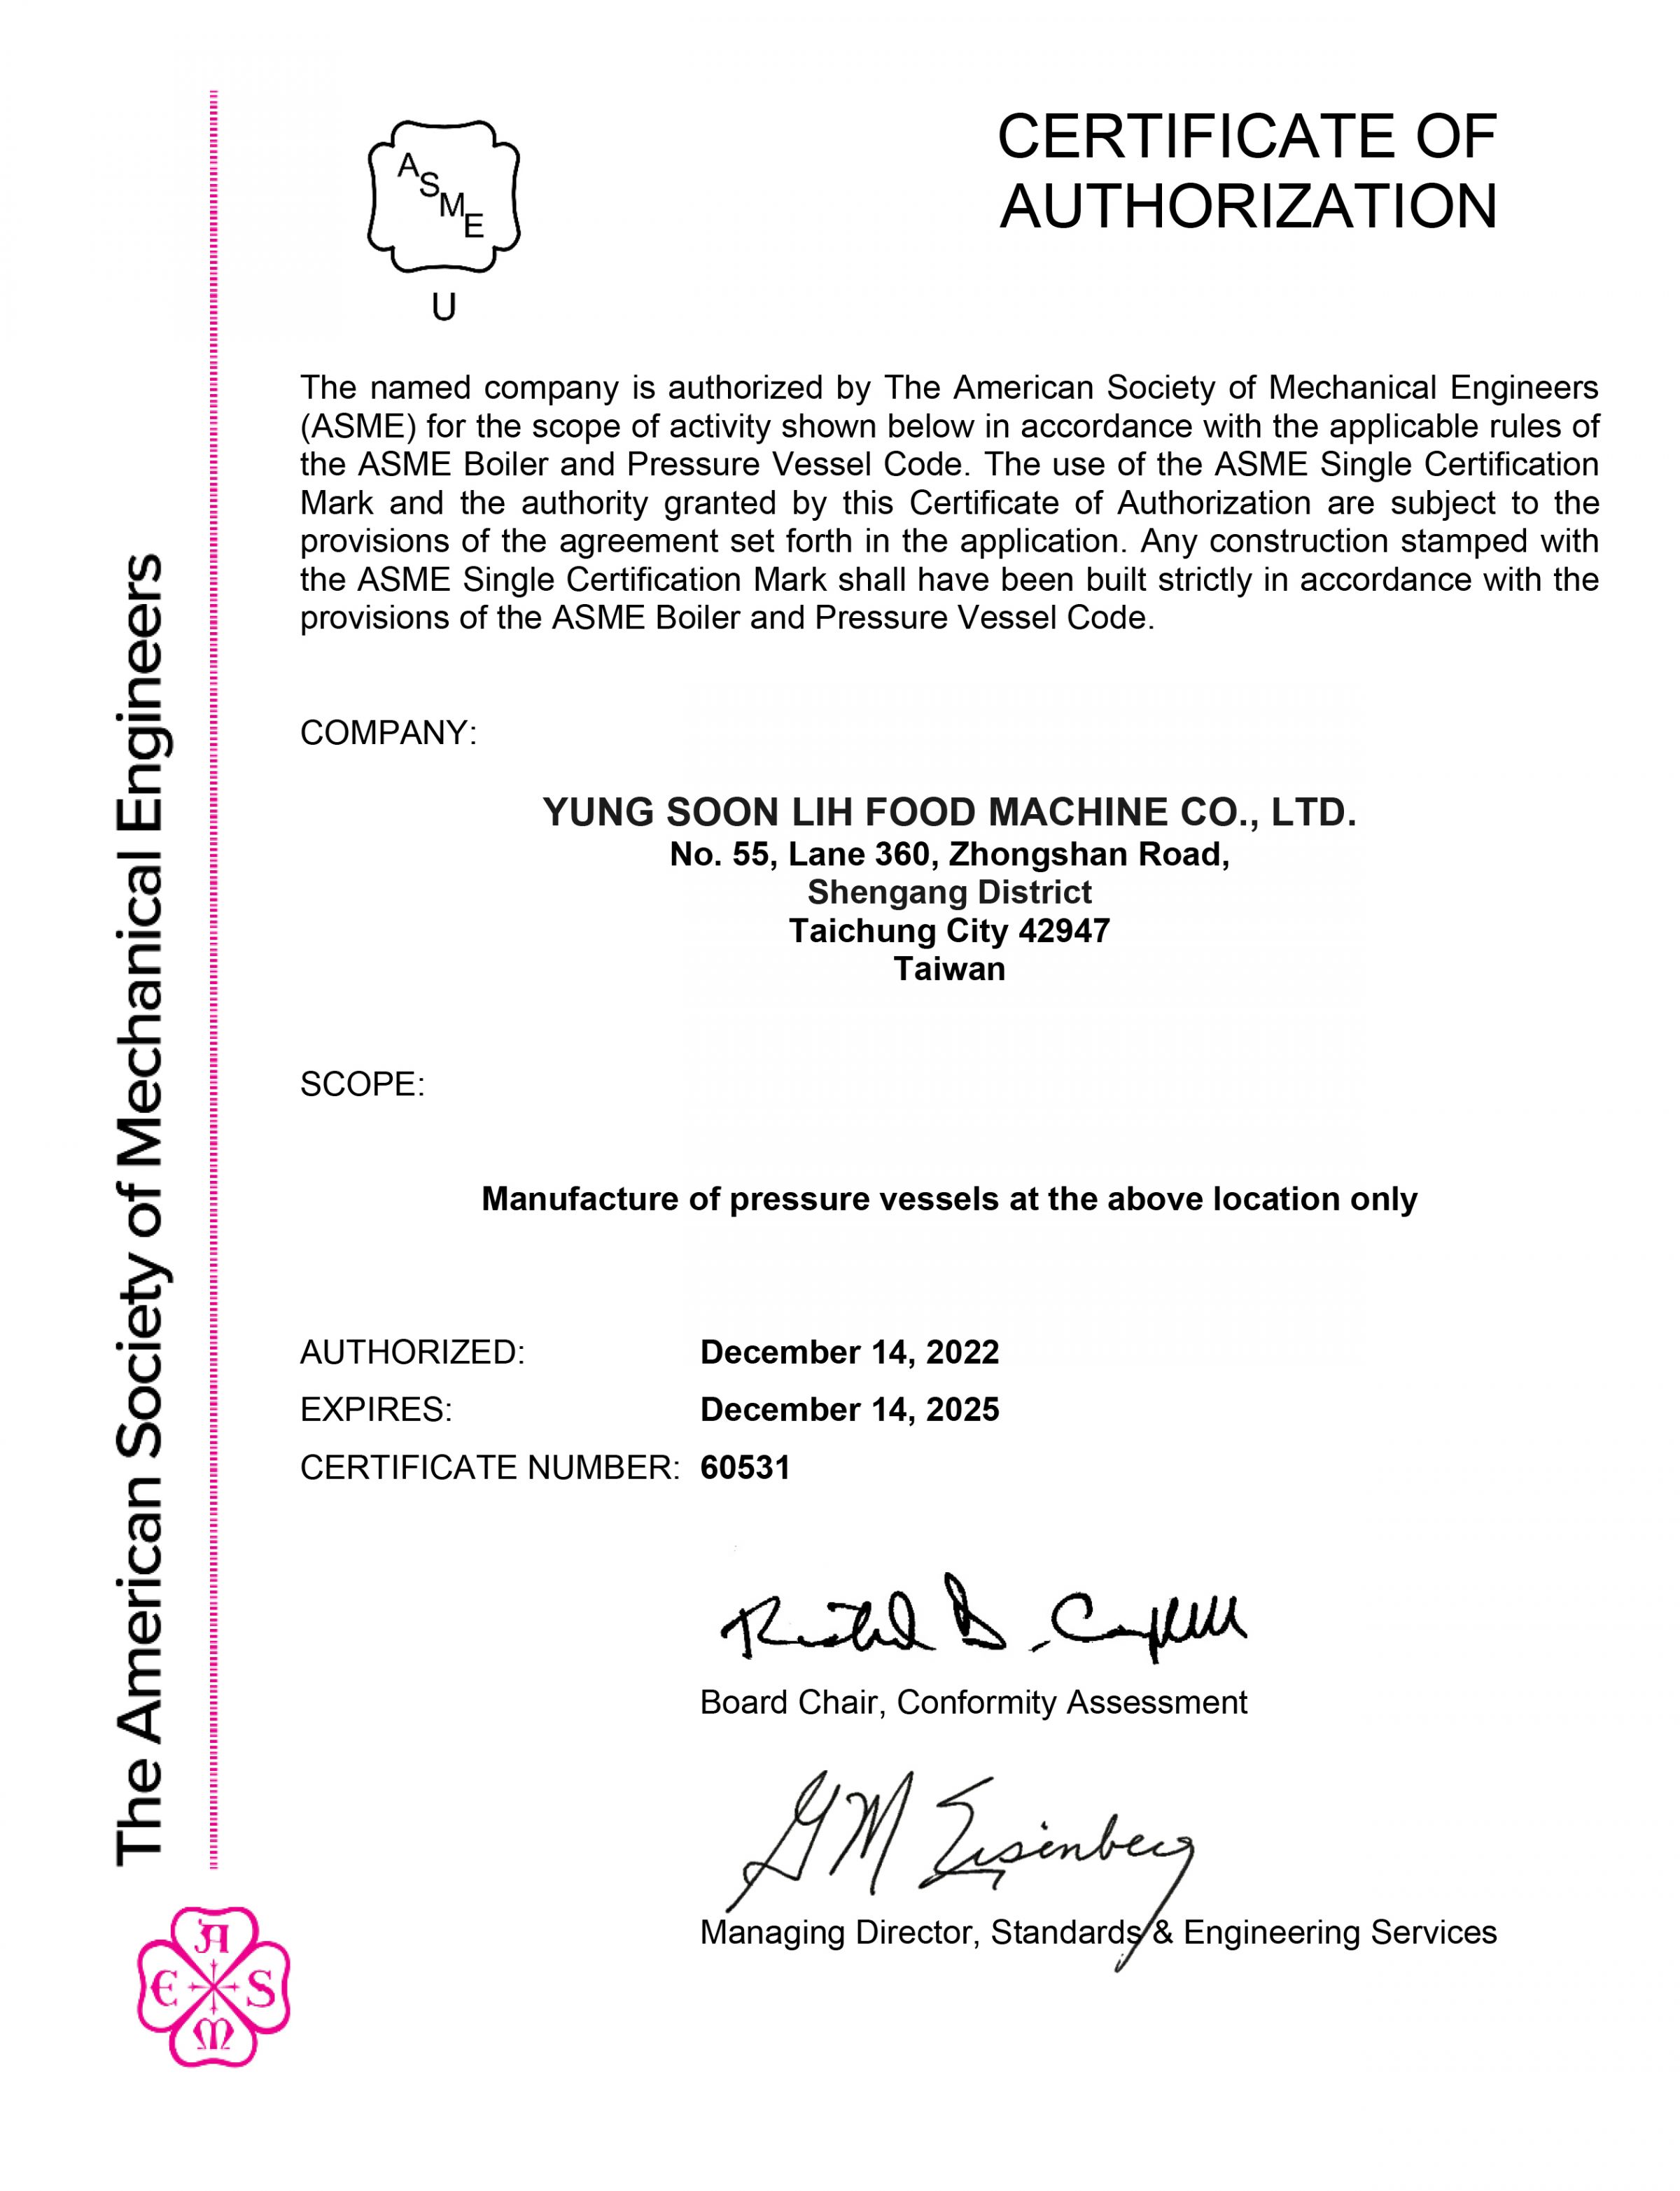 Yung Soon Lih Food Machine has obtained the international ASME U certification authorization "necessary for developing overseas markets"!